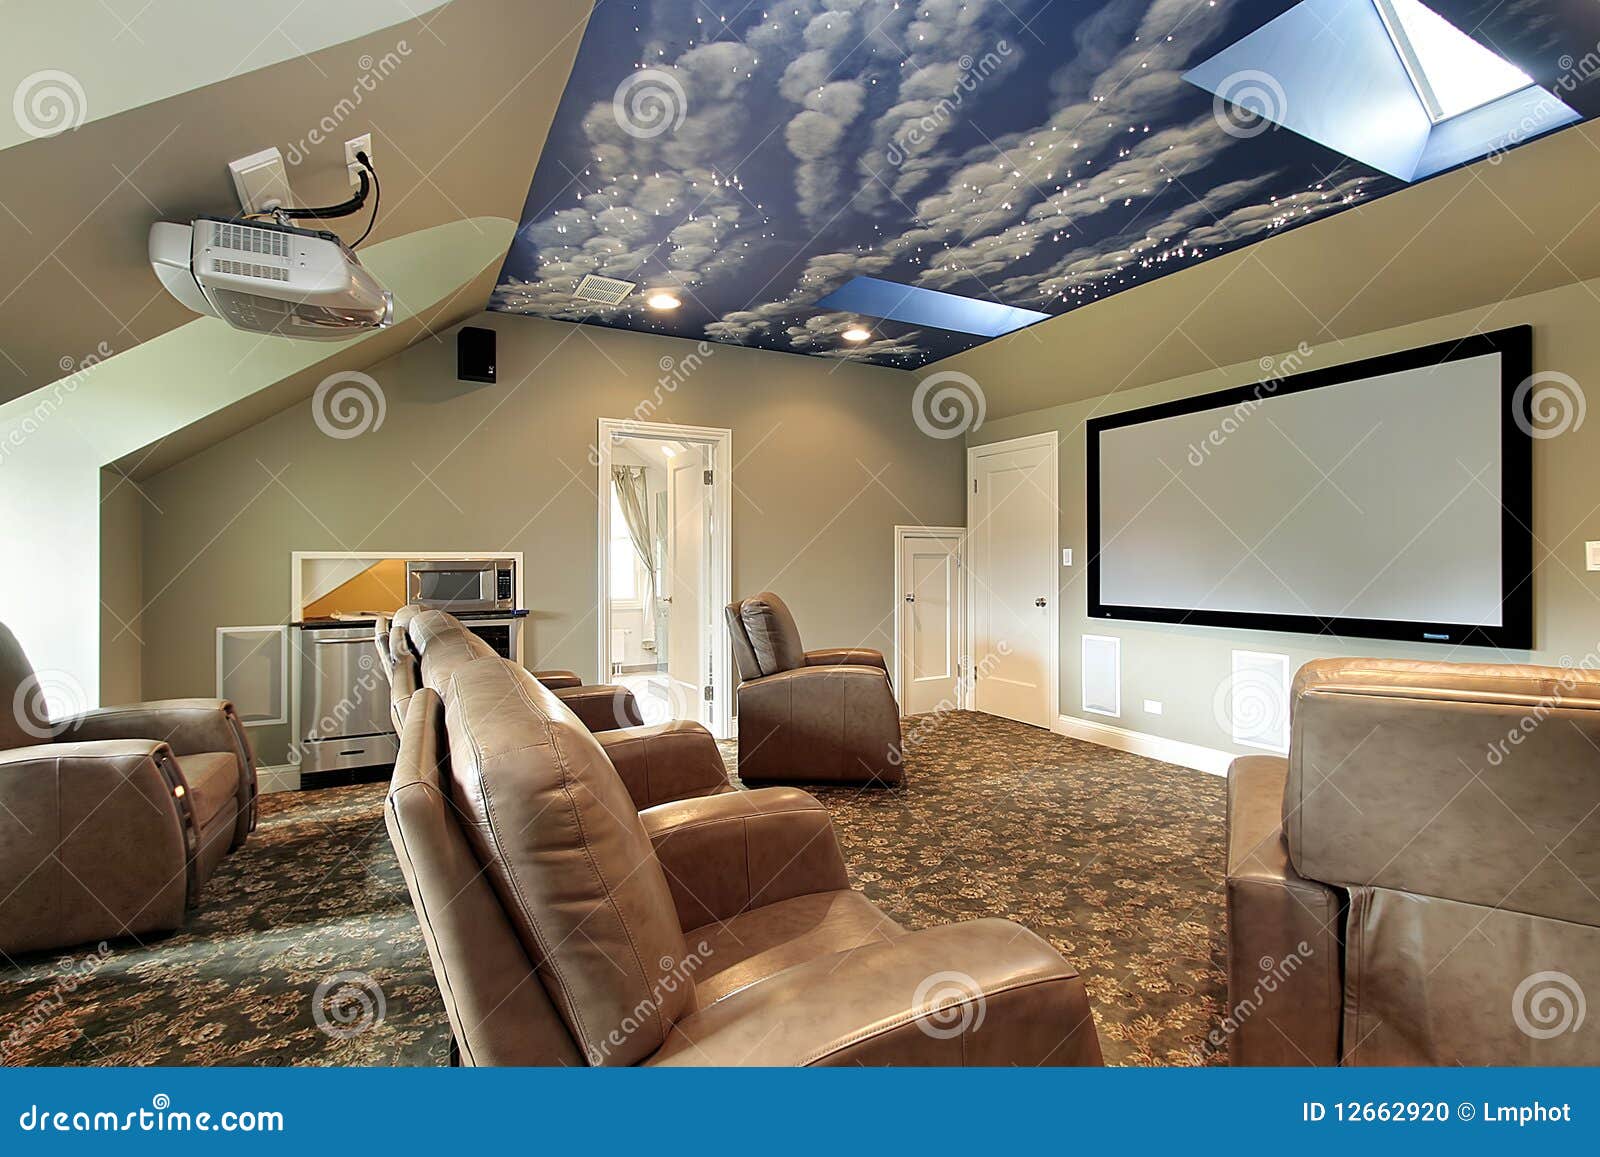 Theater With Ceiling Design Stock Photo Image Of Media